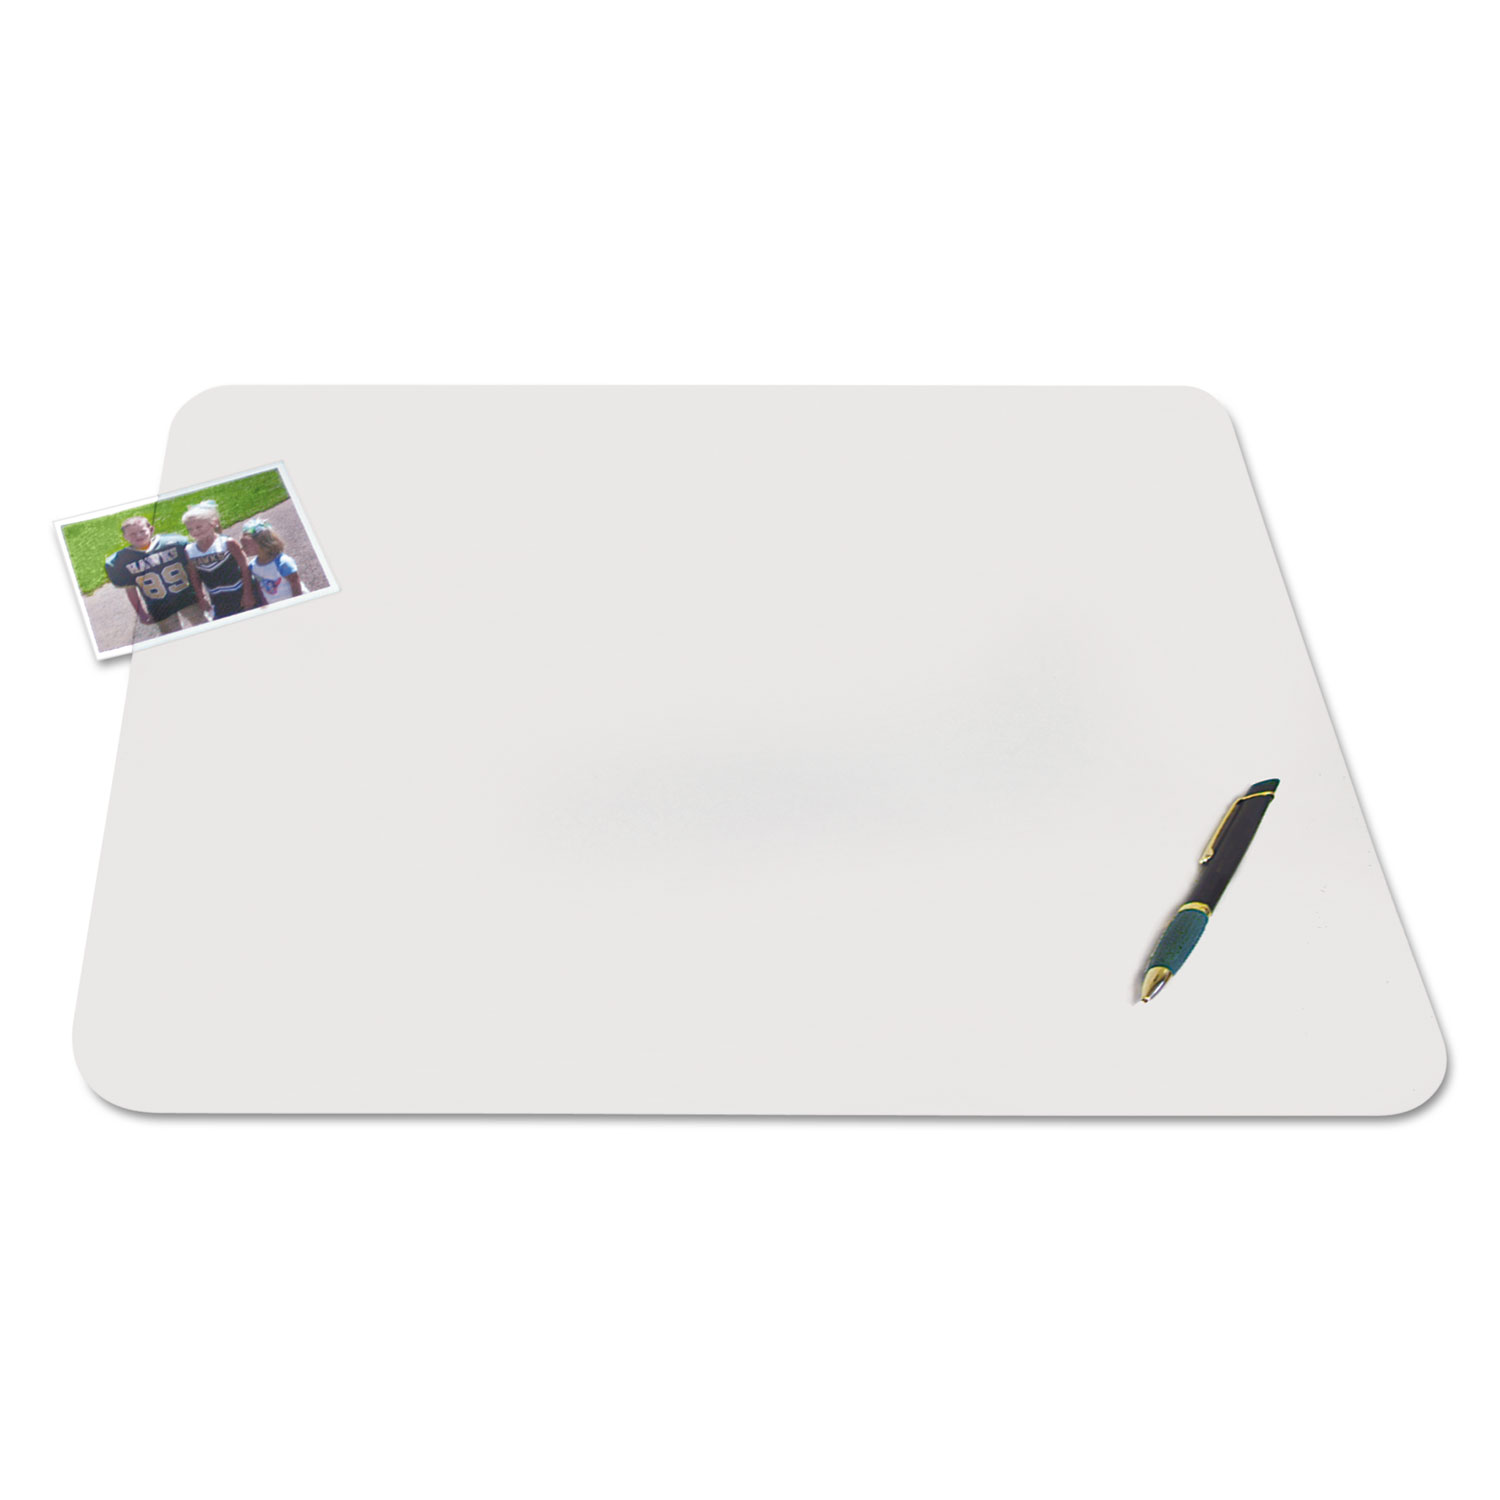 KrystalView Desk Pad with Microban, 24 x 19, Matte, Clear